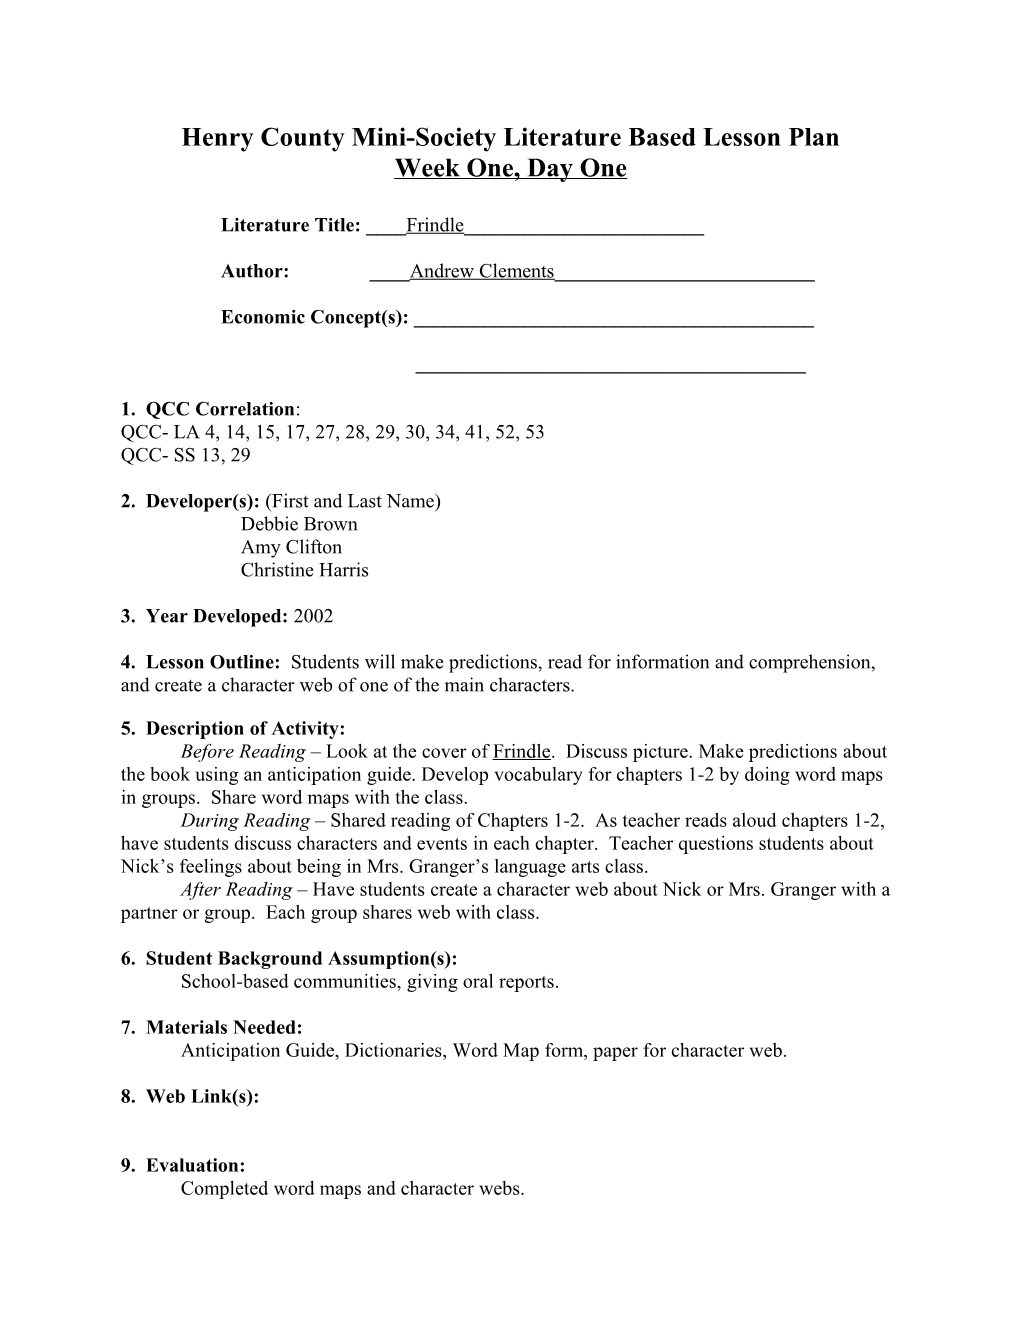 Henry County Mini-Society Literature Based Lesson Plan